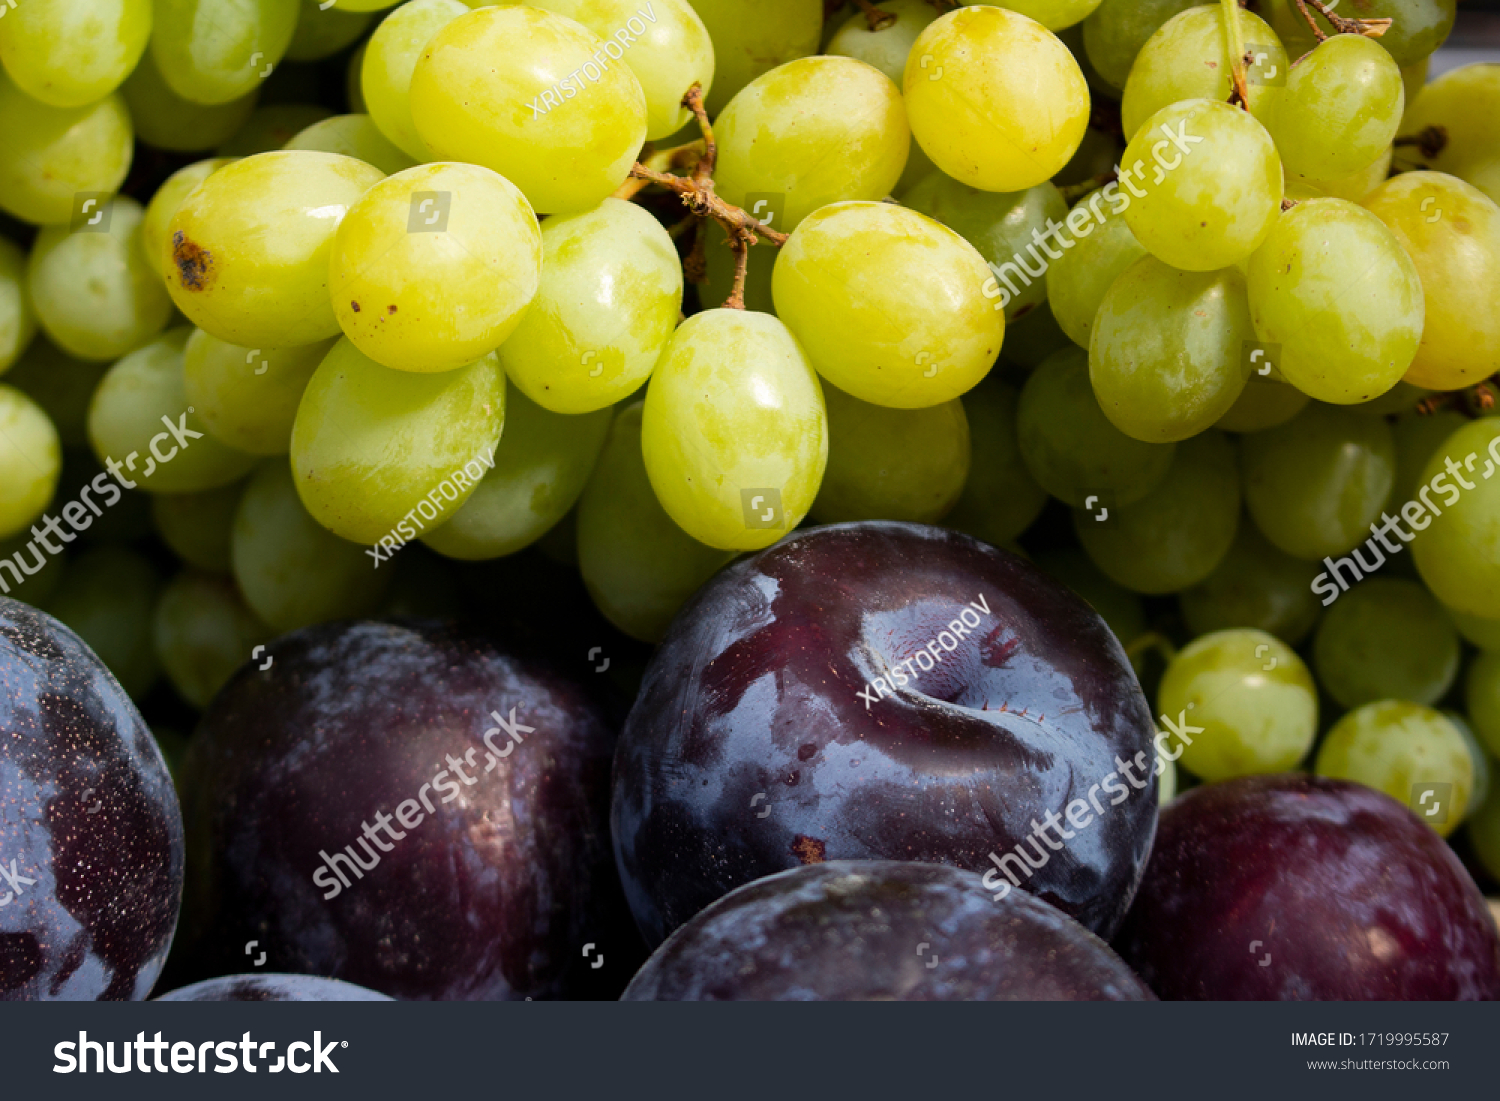 waxy fruits , colorful variety of fruits on counter of farmer's market. green grapes, plums close up selective focus. Fruit is a source of vitamins and health. concept of strengthening immunity #1719995587